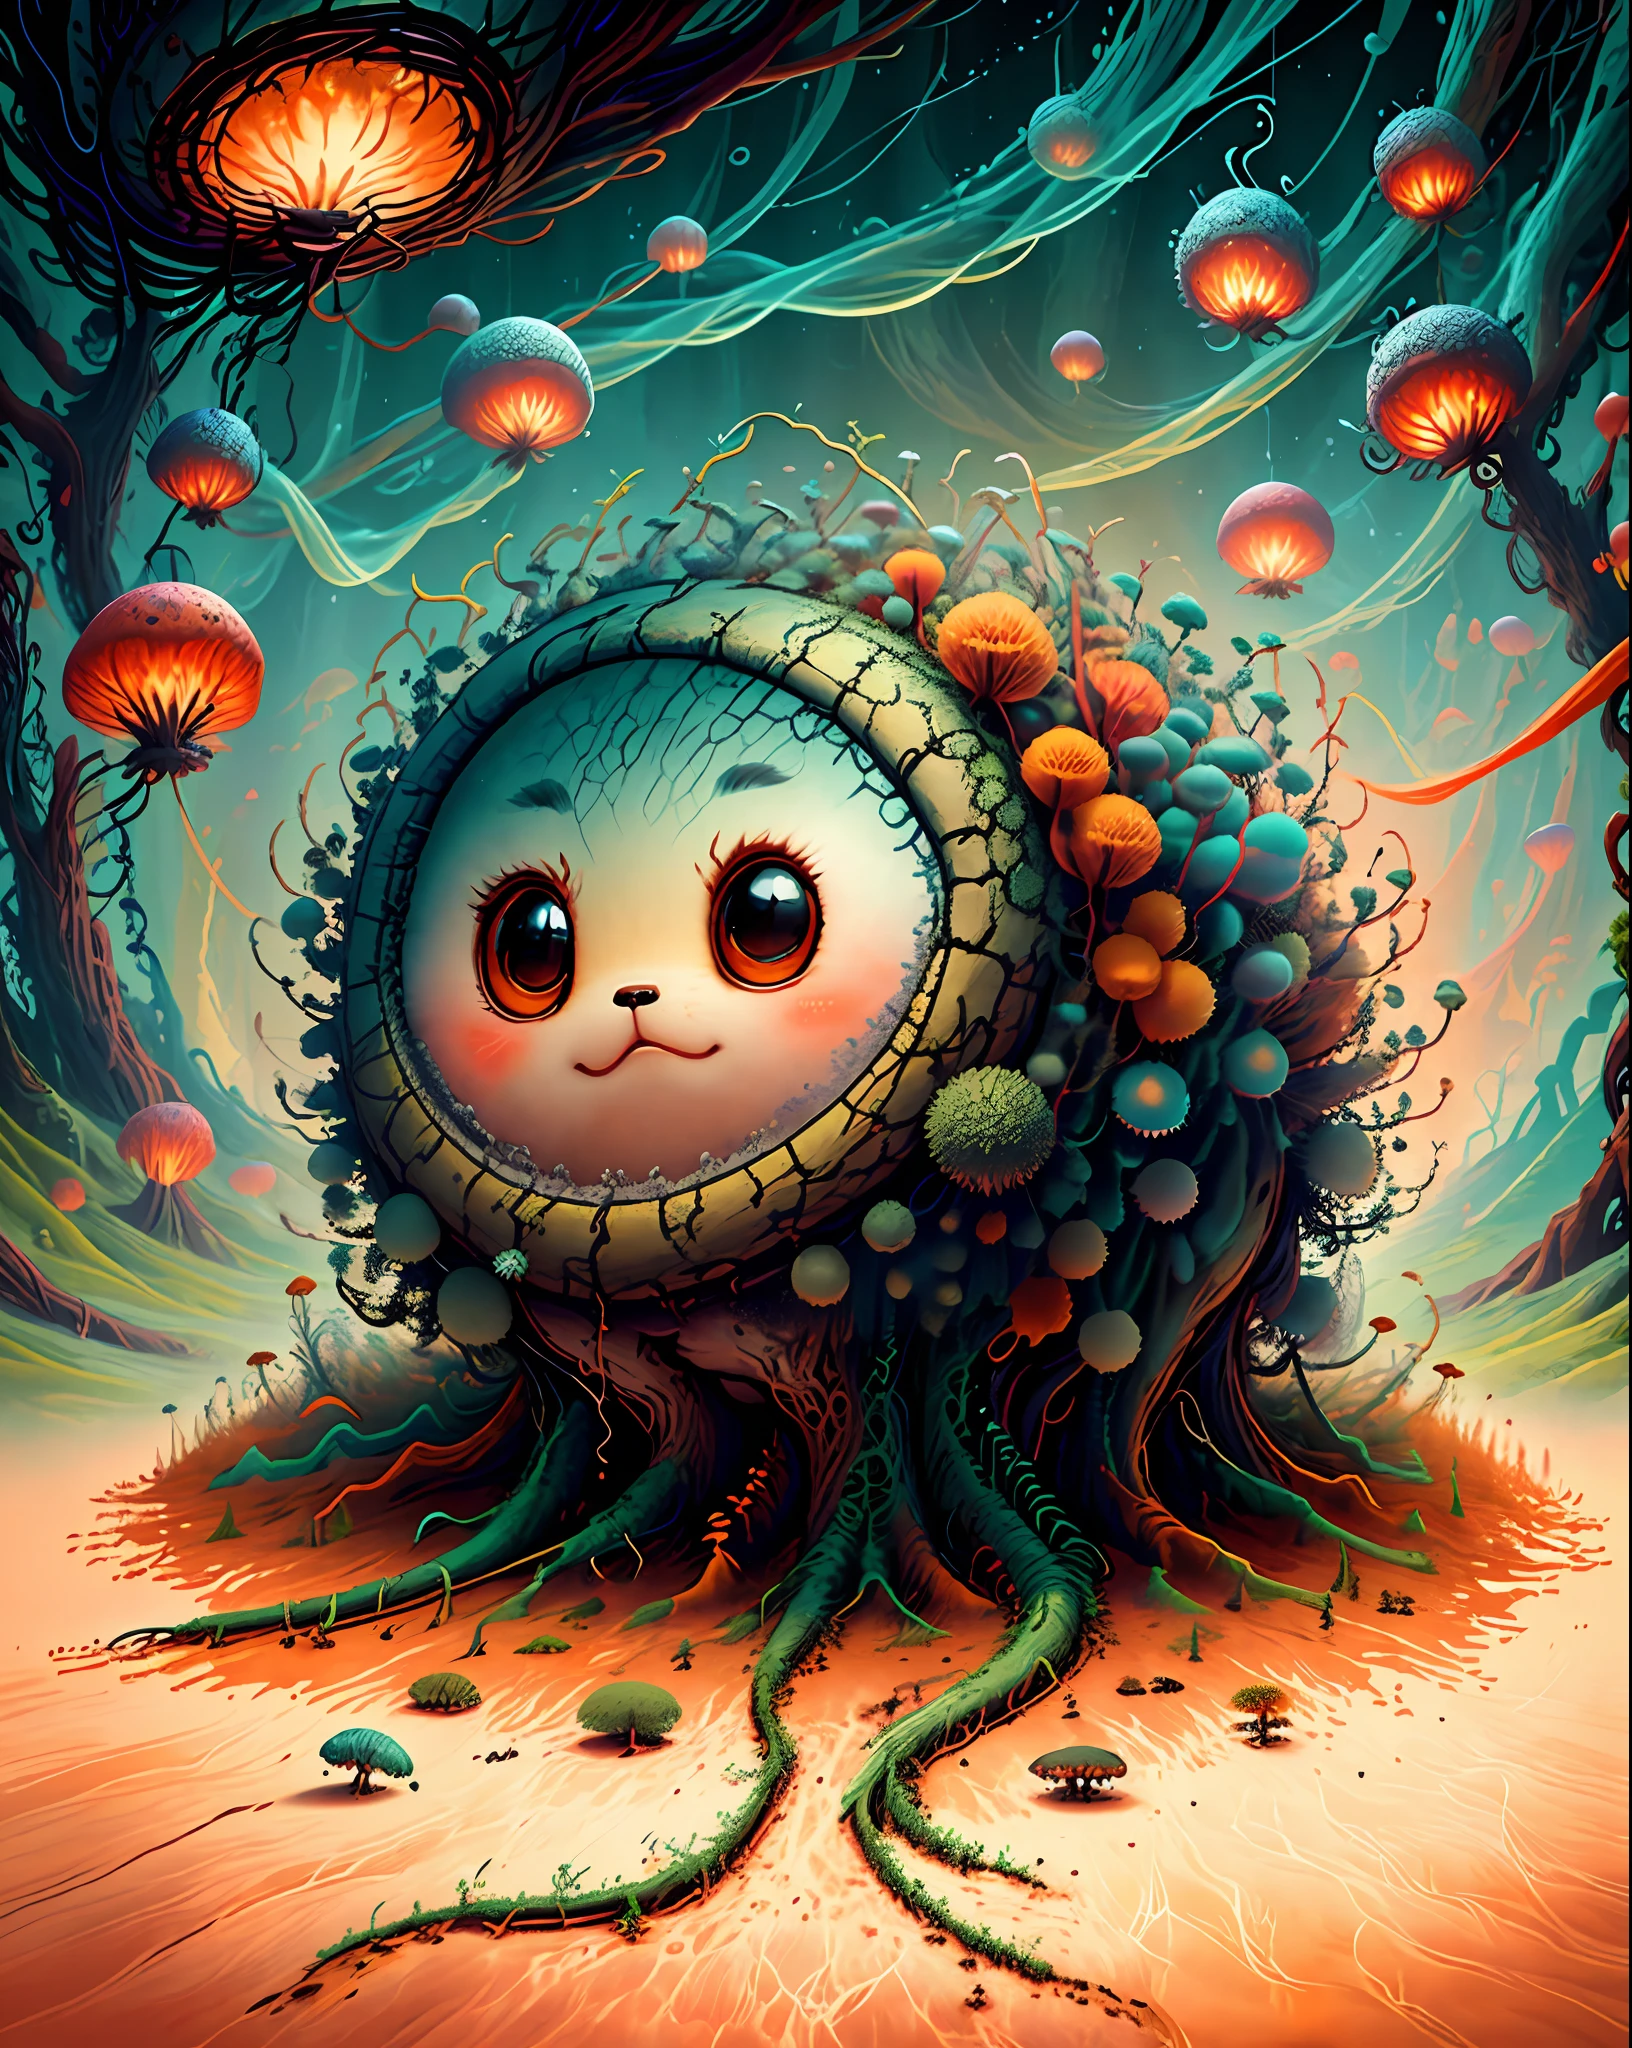 "Create a masterful masterpiece of cute creatures with ultra-detailed concept art inspired by . Utilize Stable Diffusion's power to unleash your inner Cu73Cre4ture programmer and bring your imagination to life!"